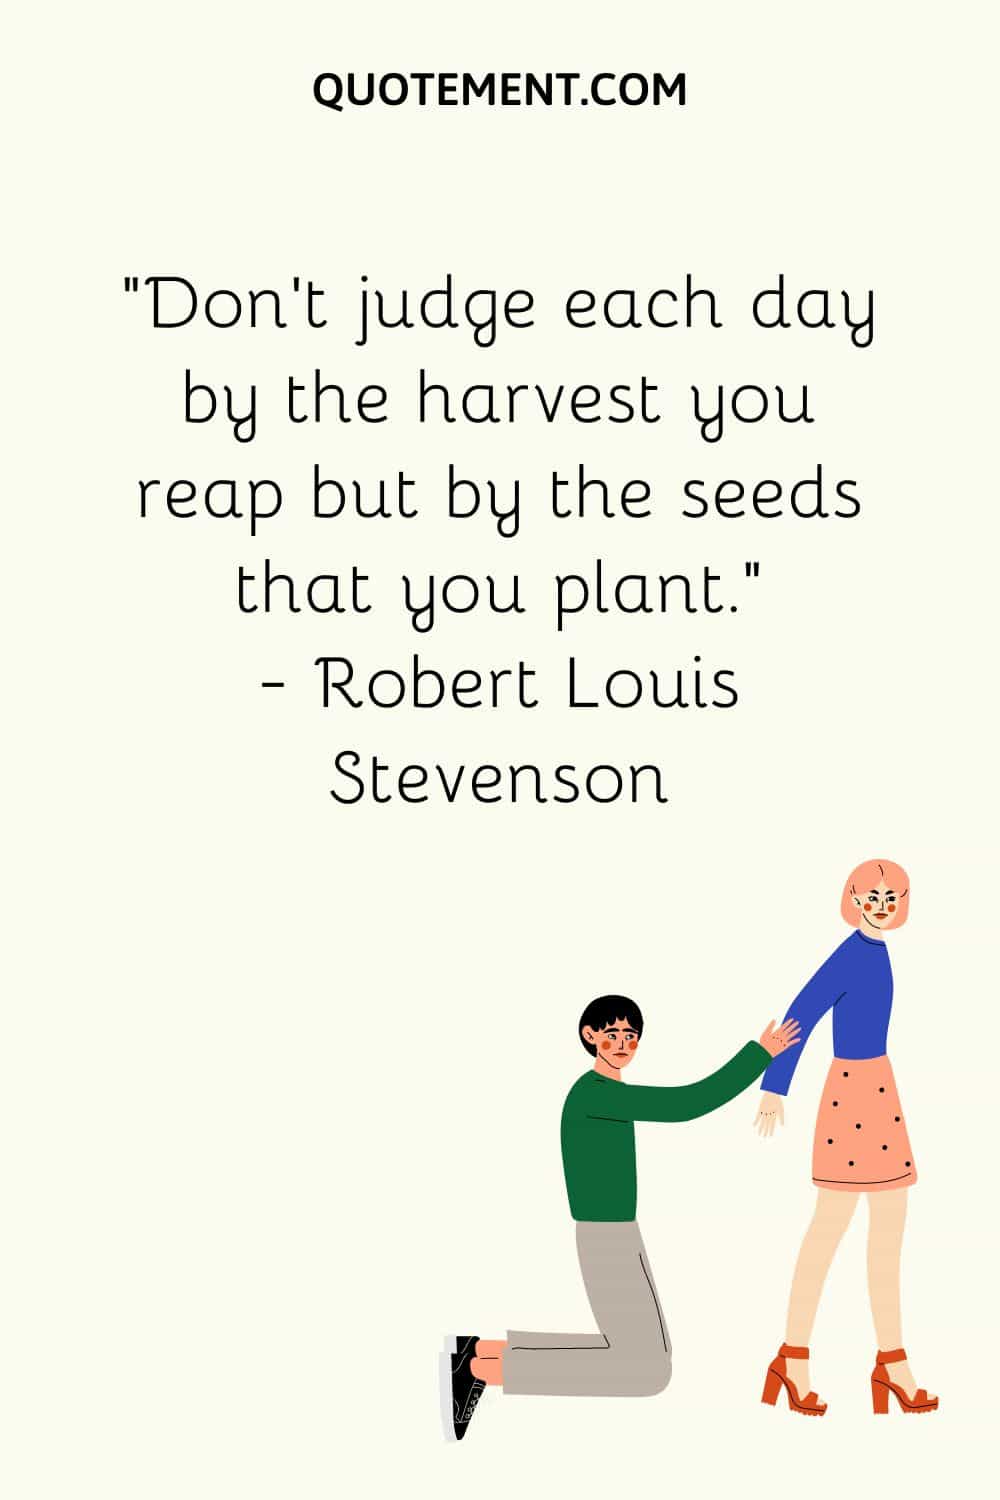 Don’t judge each day by the harvest you reap but by the seeds that you plant